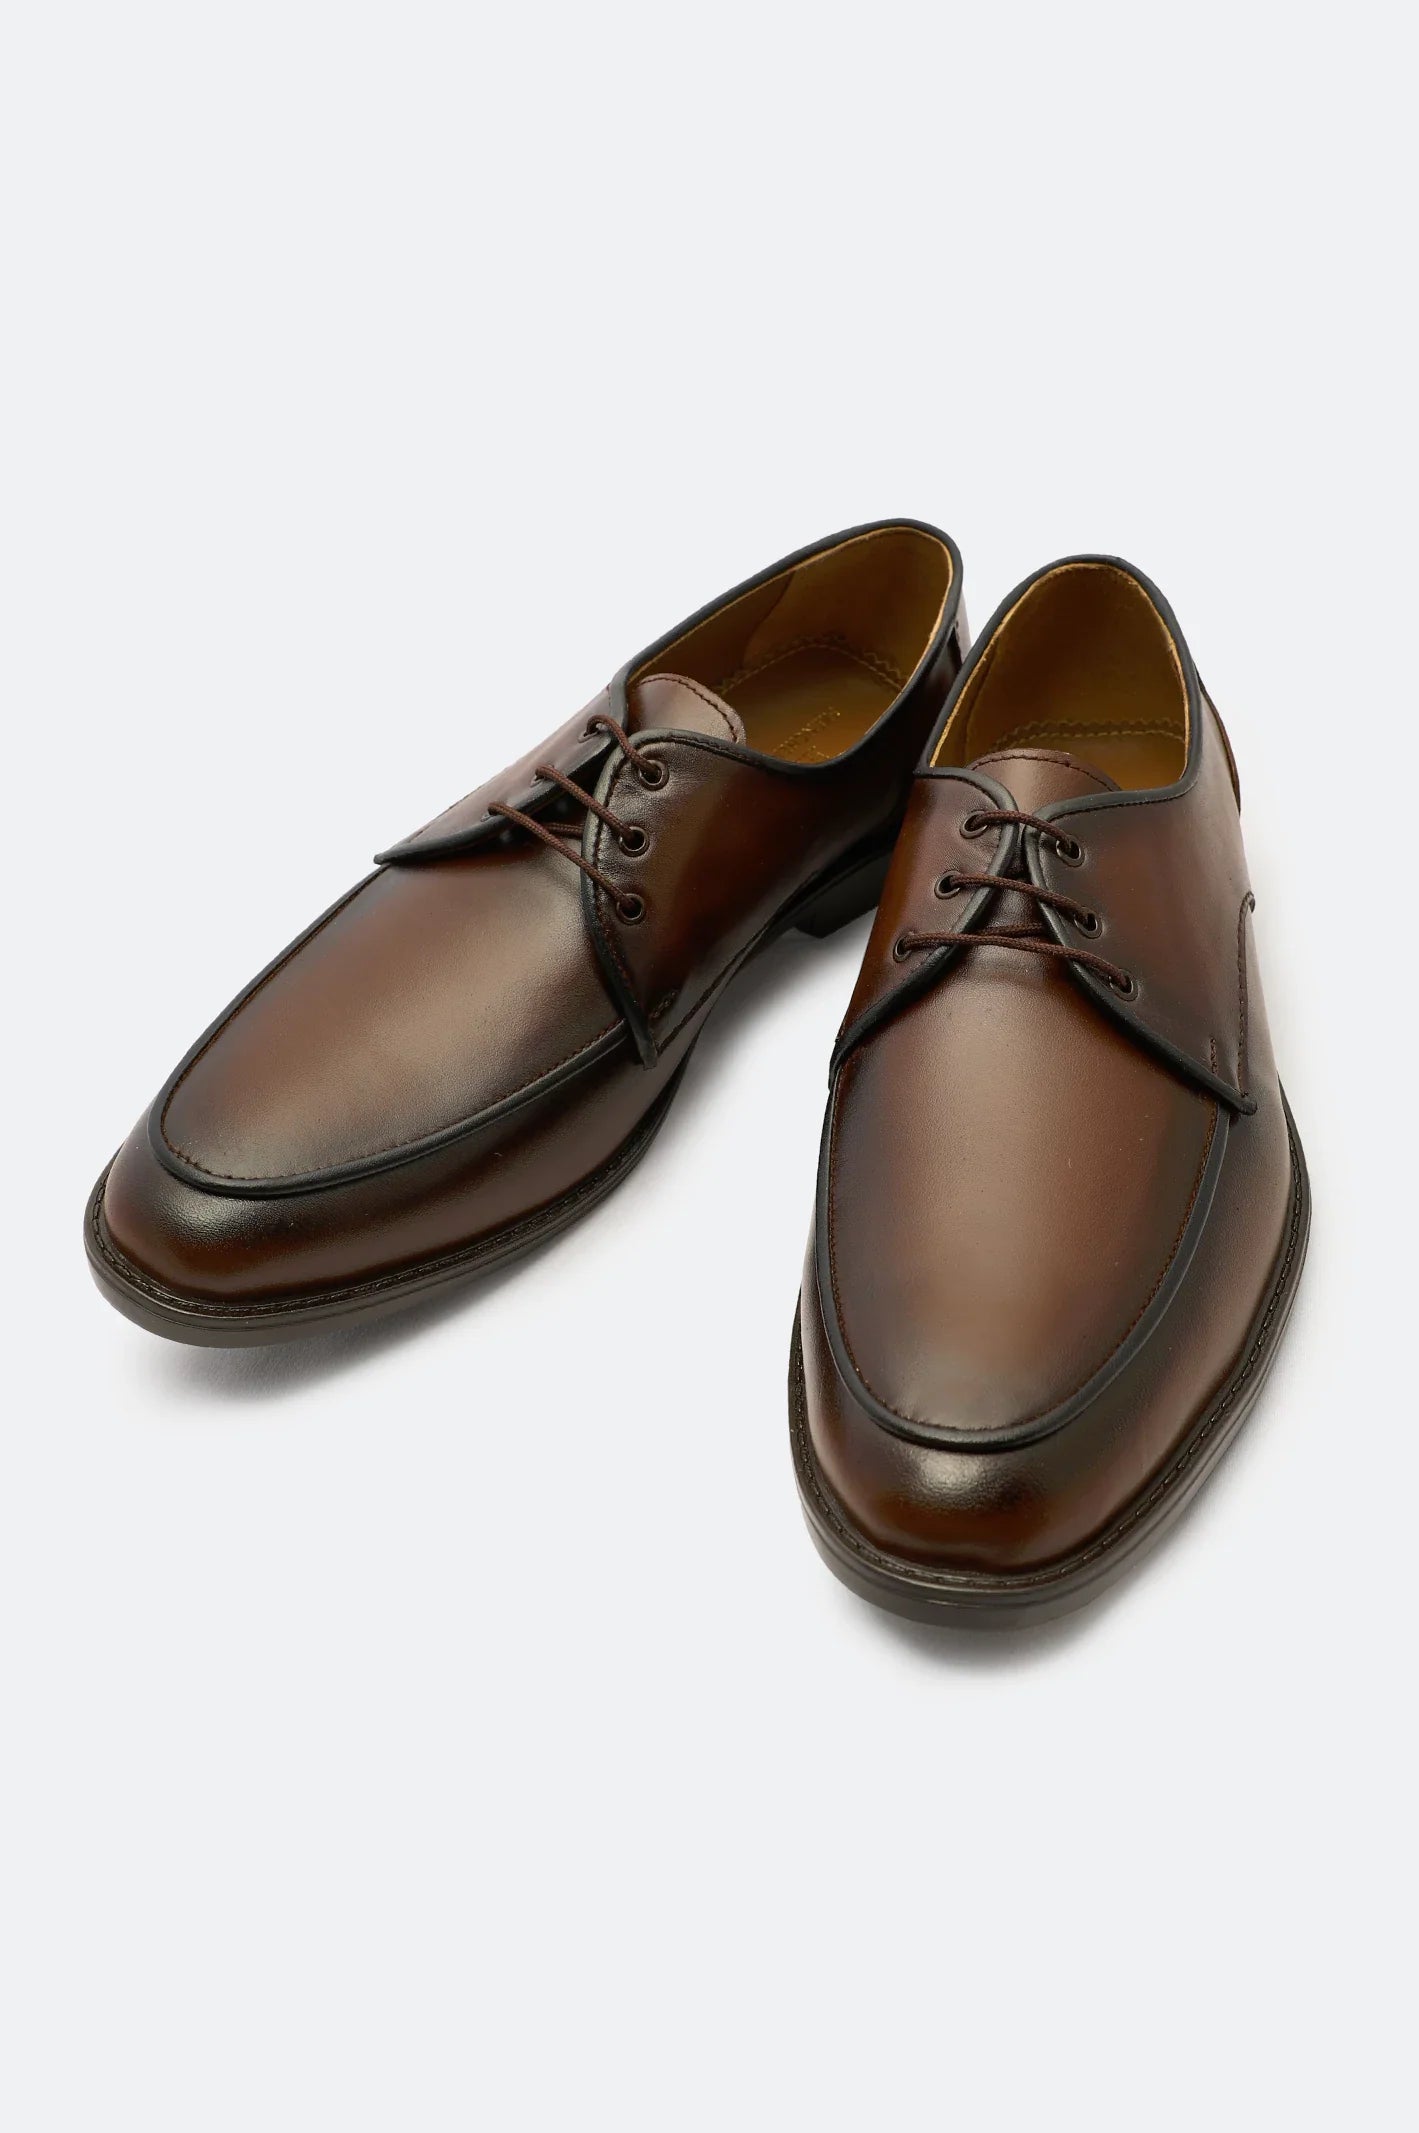 Brown Derby Formal Shoes From French Emporio By Diners